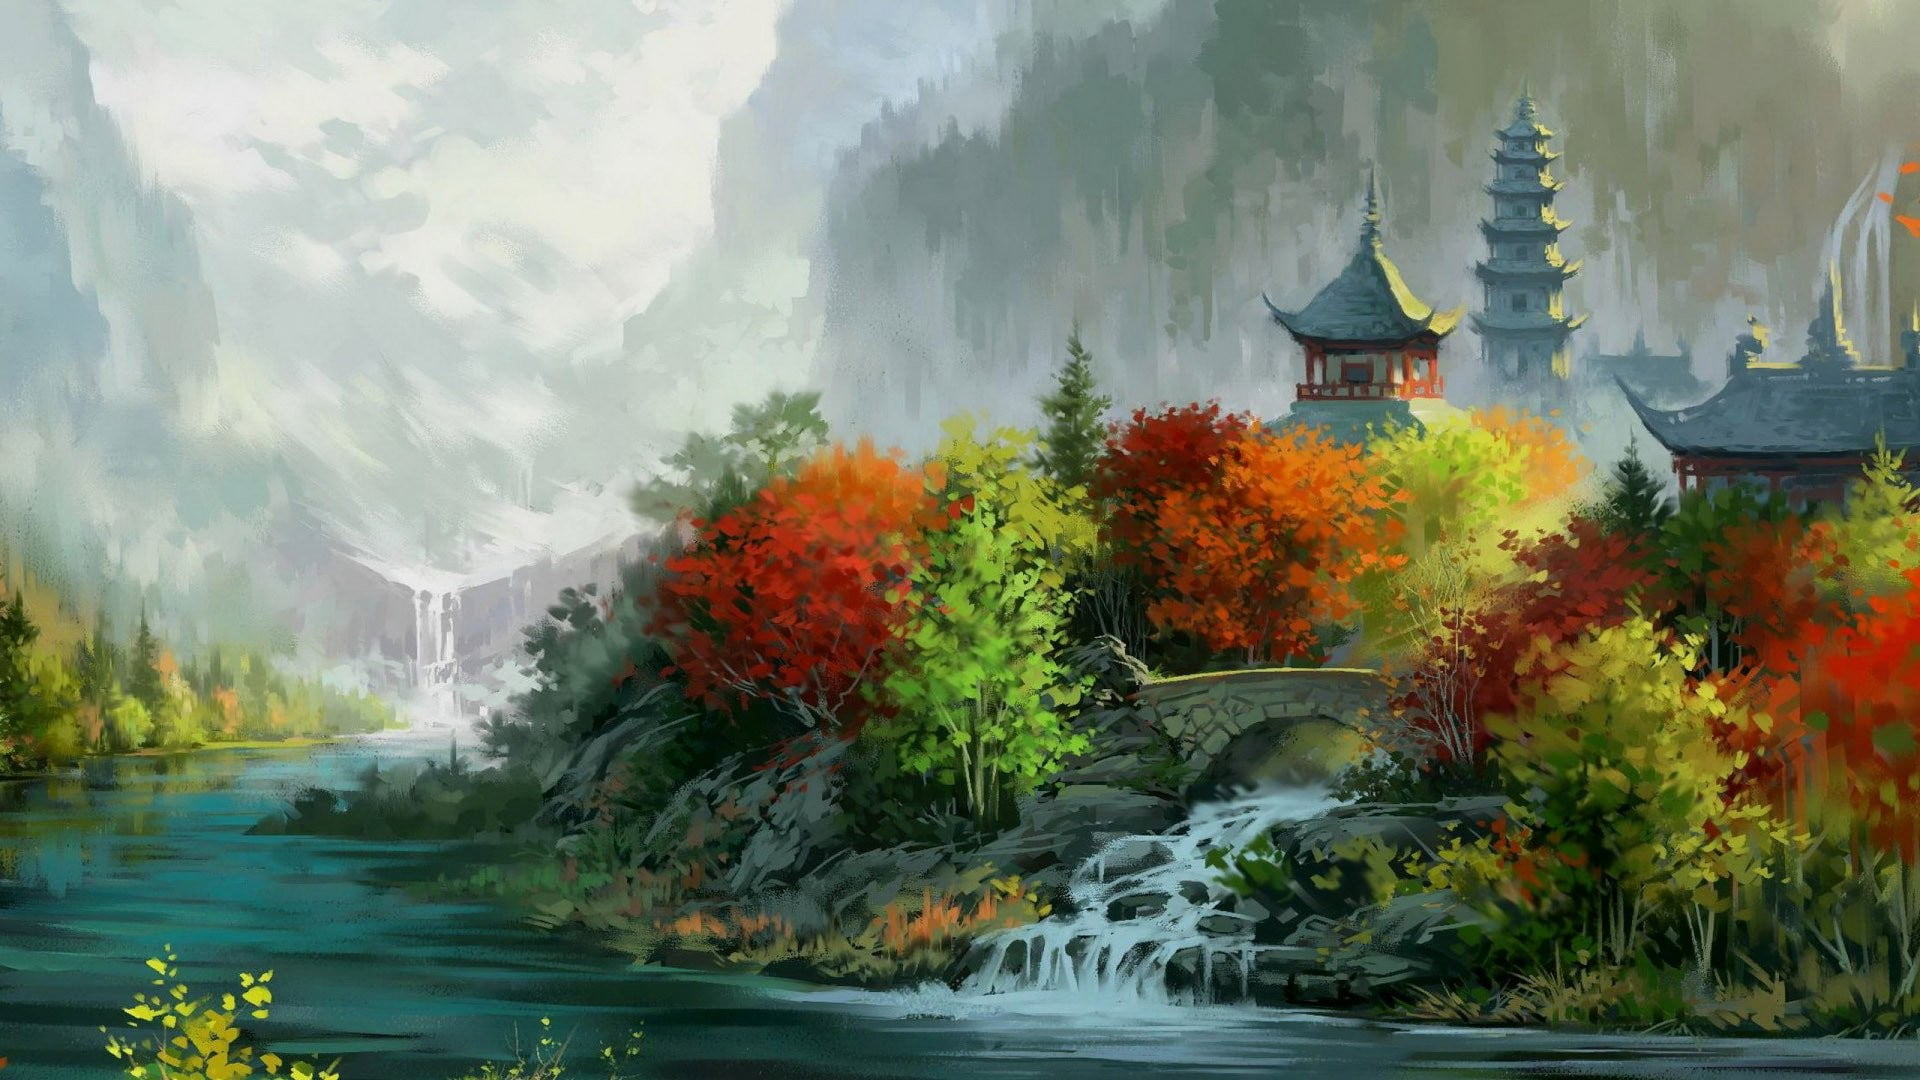 Wallpaper Painting Of Pagoda And Trees, River